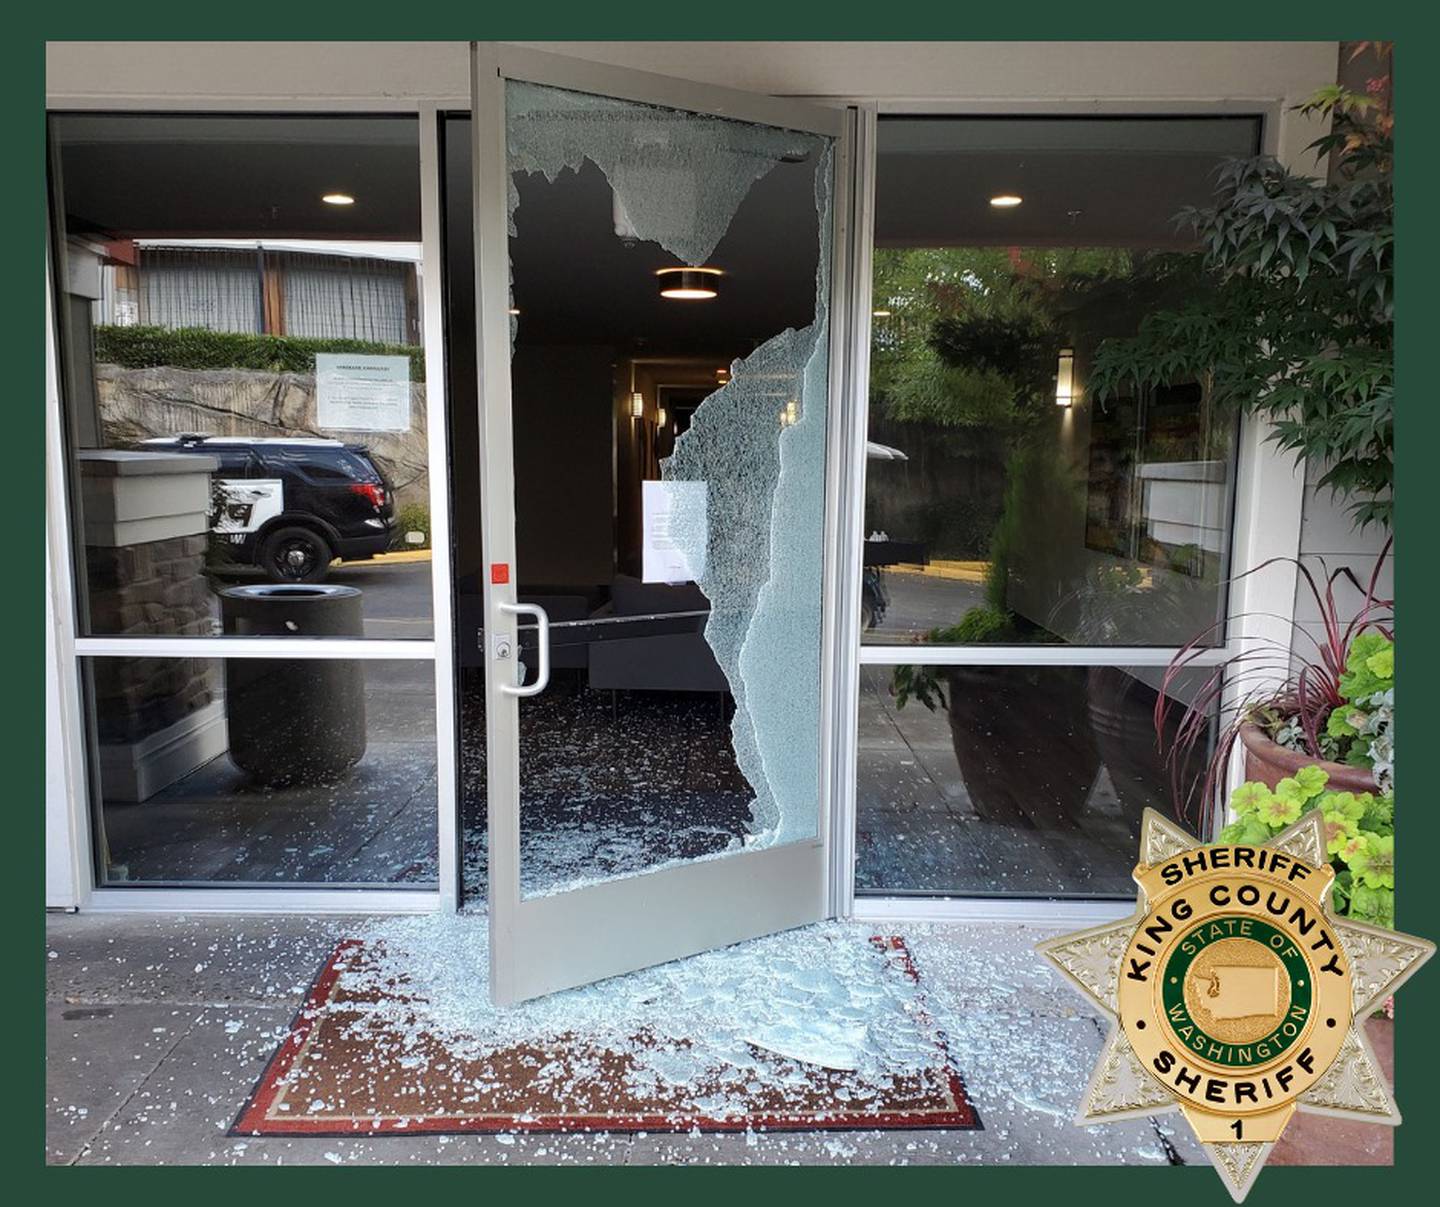 Deputies said the suspect through a rock to break out the glass door.